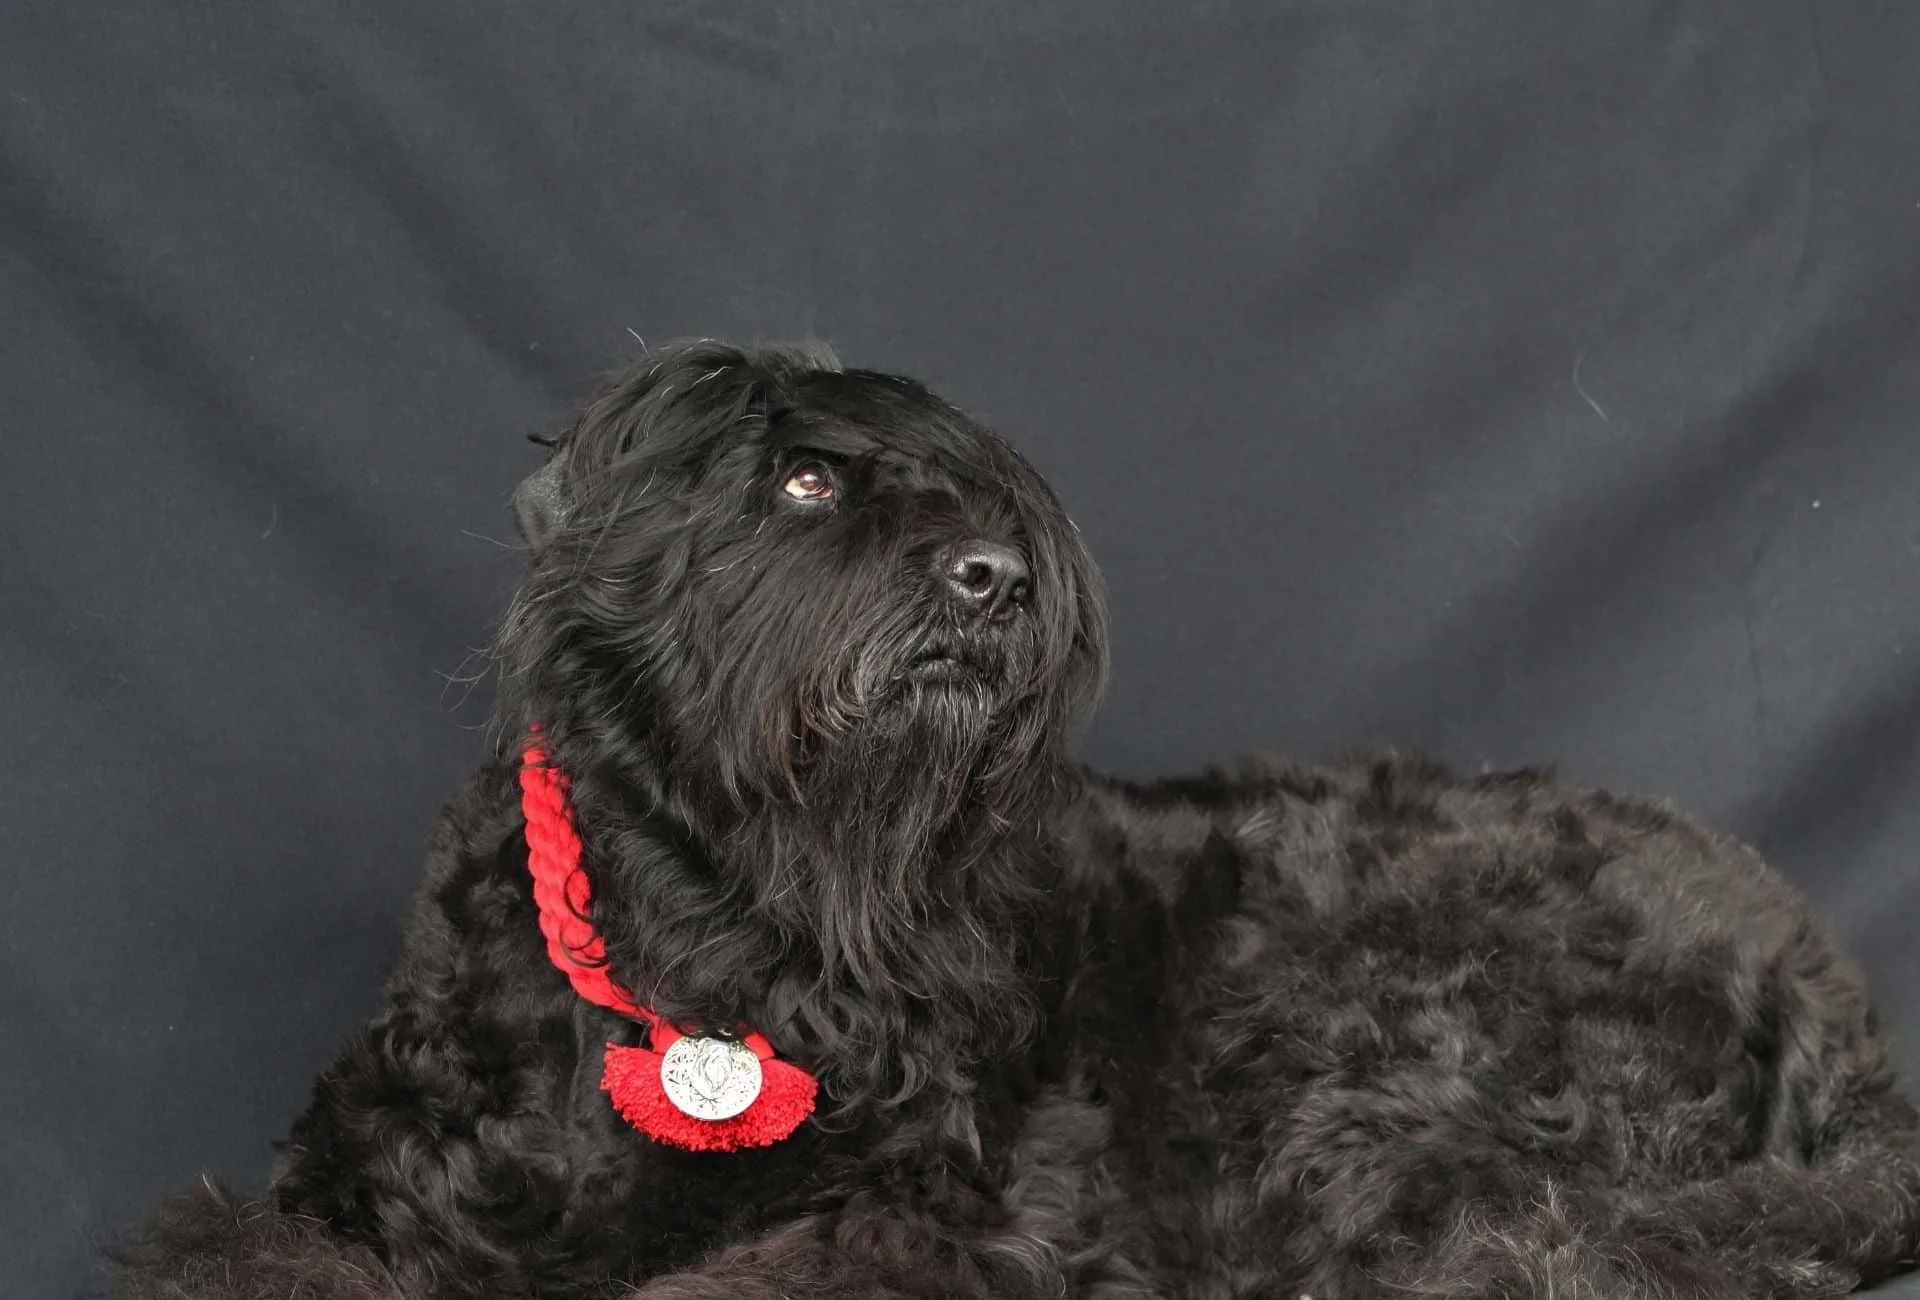 Black Russian Terrier as possible guard dog choice.